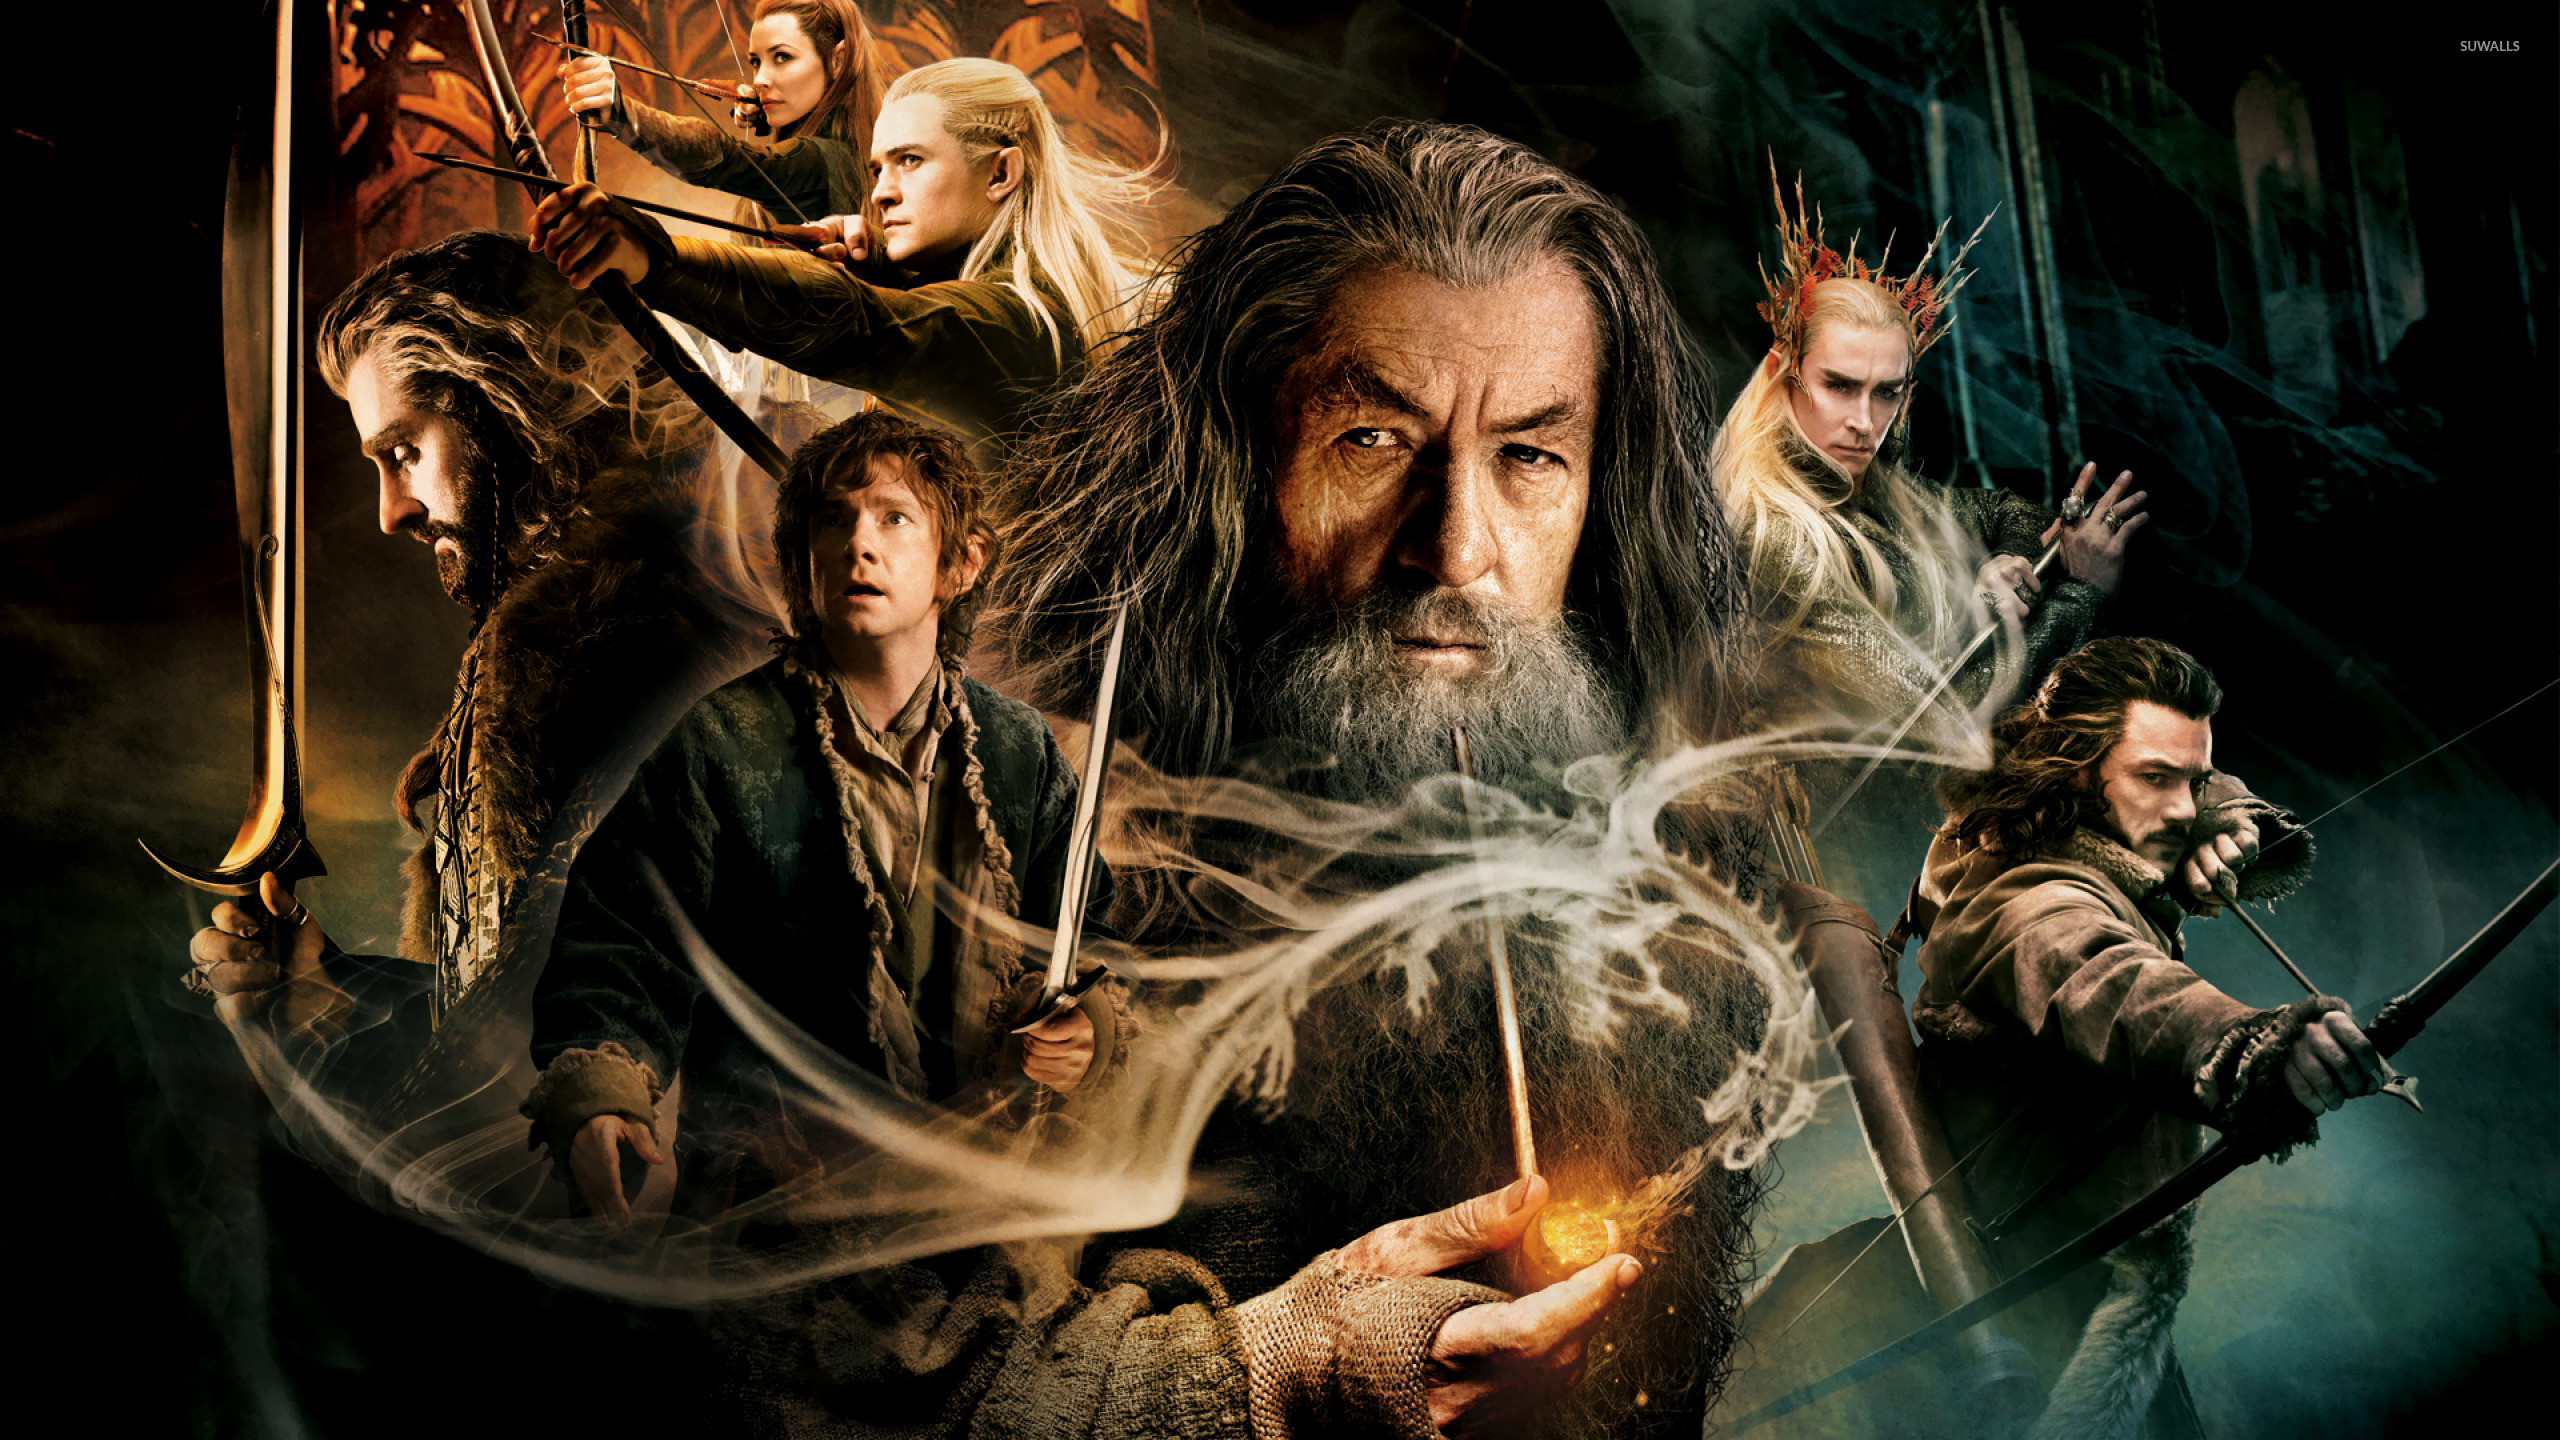 2560x1440 The Hobbit: The Desolation of Smaug wallpaper - Movie wallpapers .